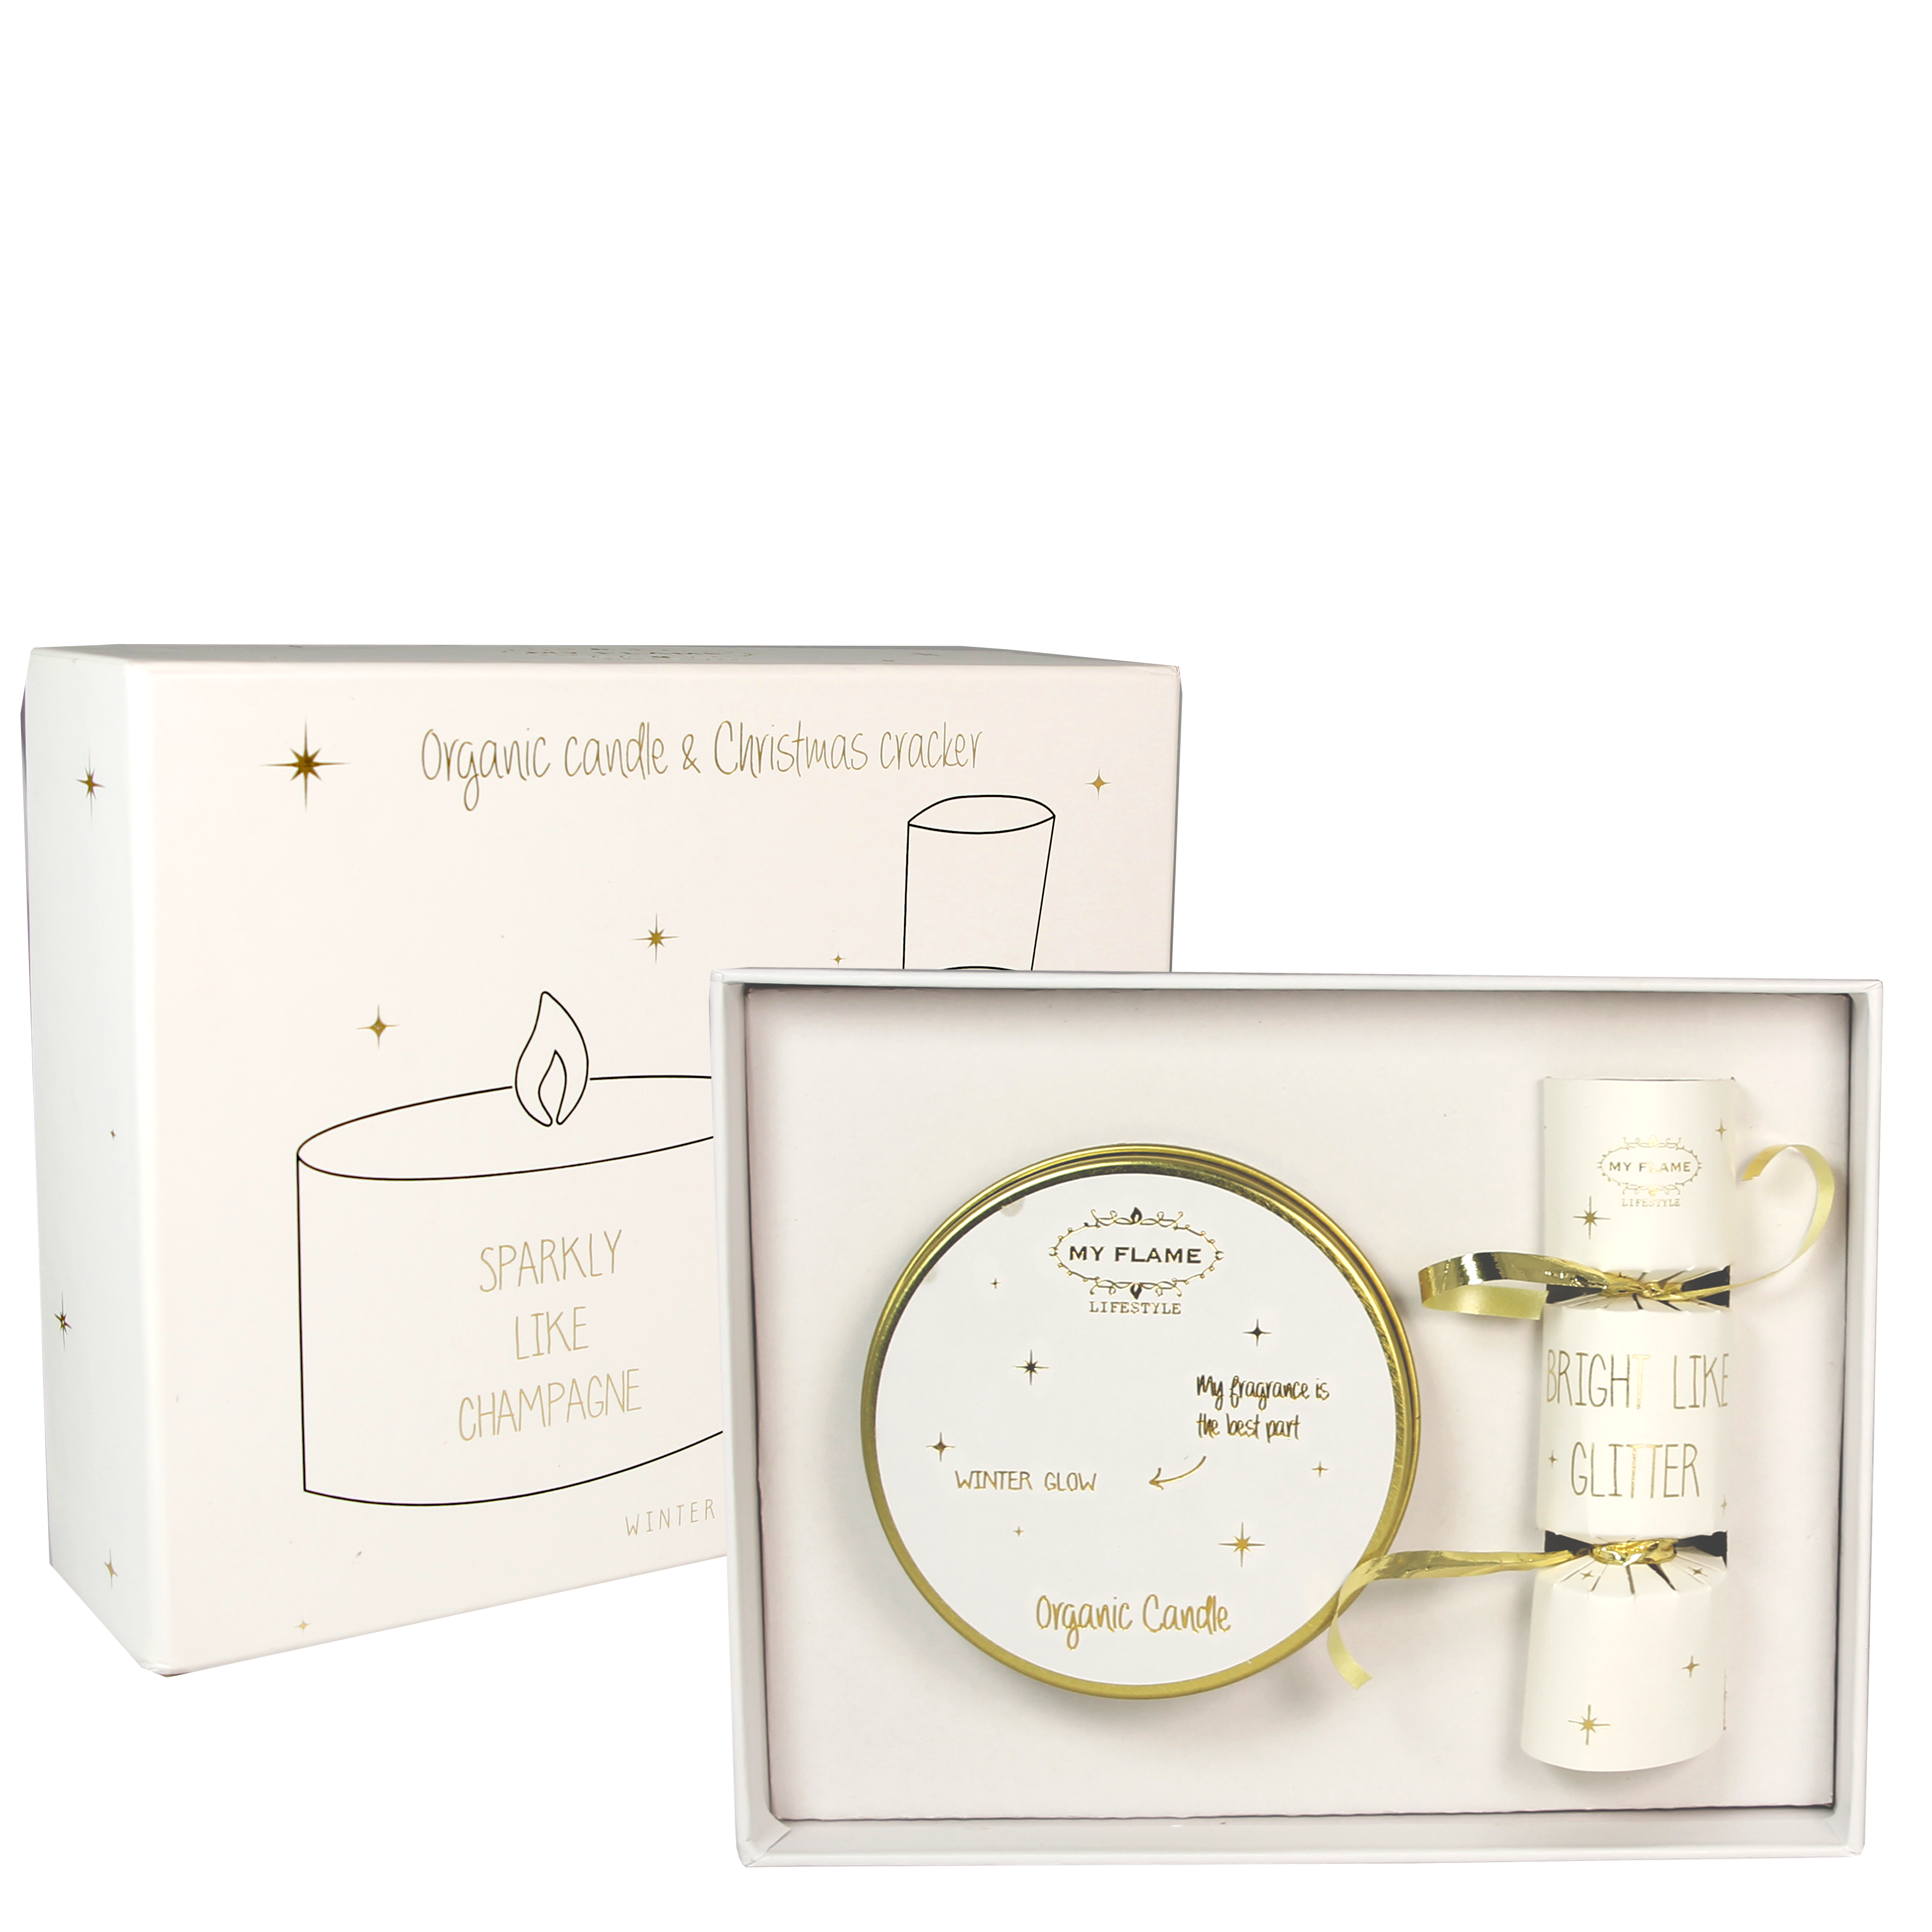 My Flame Lifestyle Giftbox x-mas - Sparkly like champagne - Winter glow